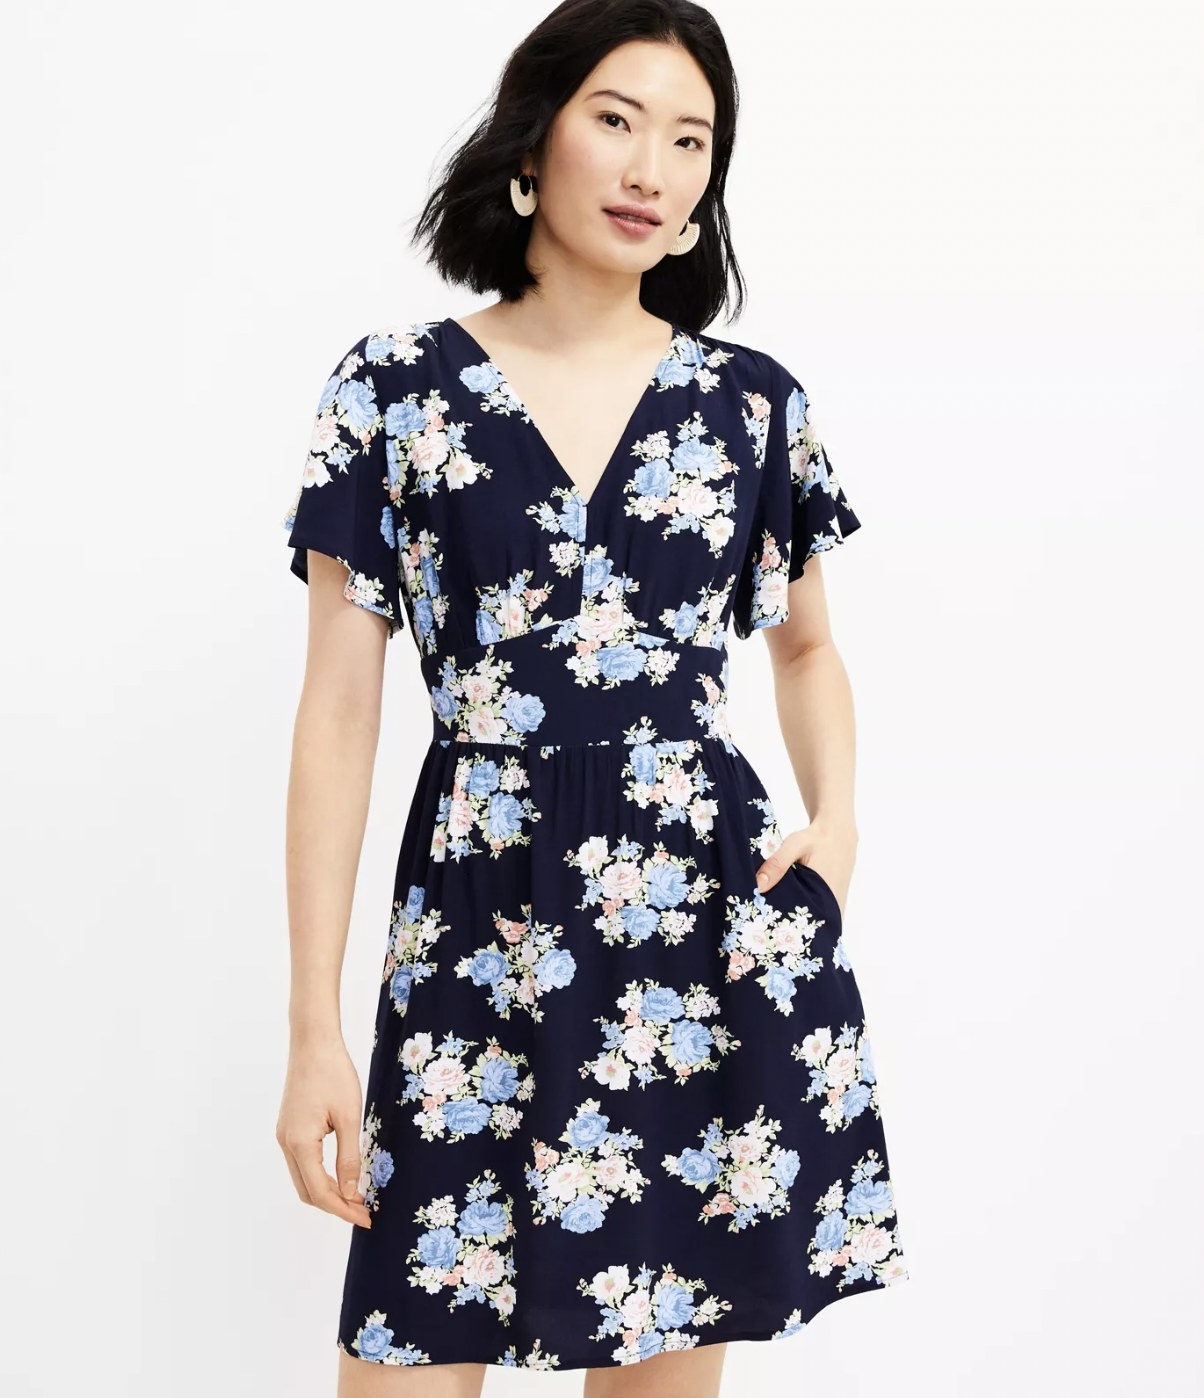 Model wearing the blue floral dress with hand in pocket